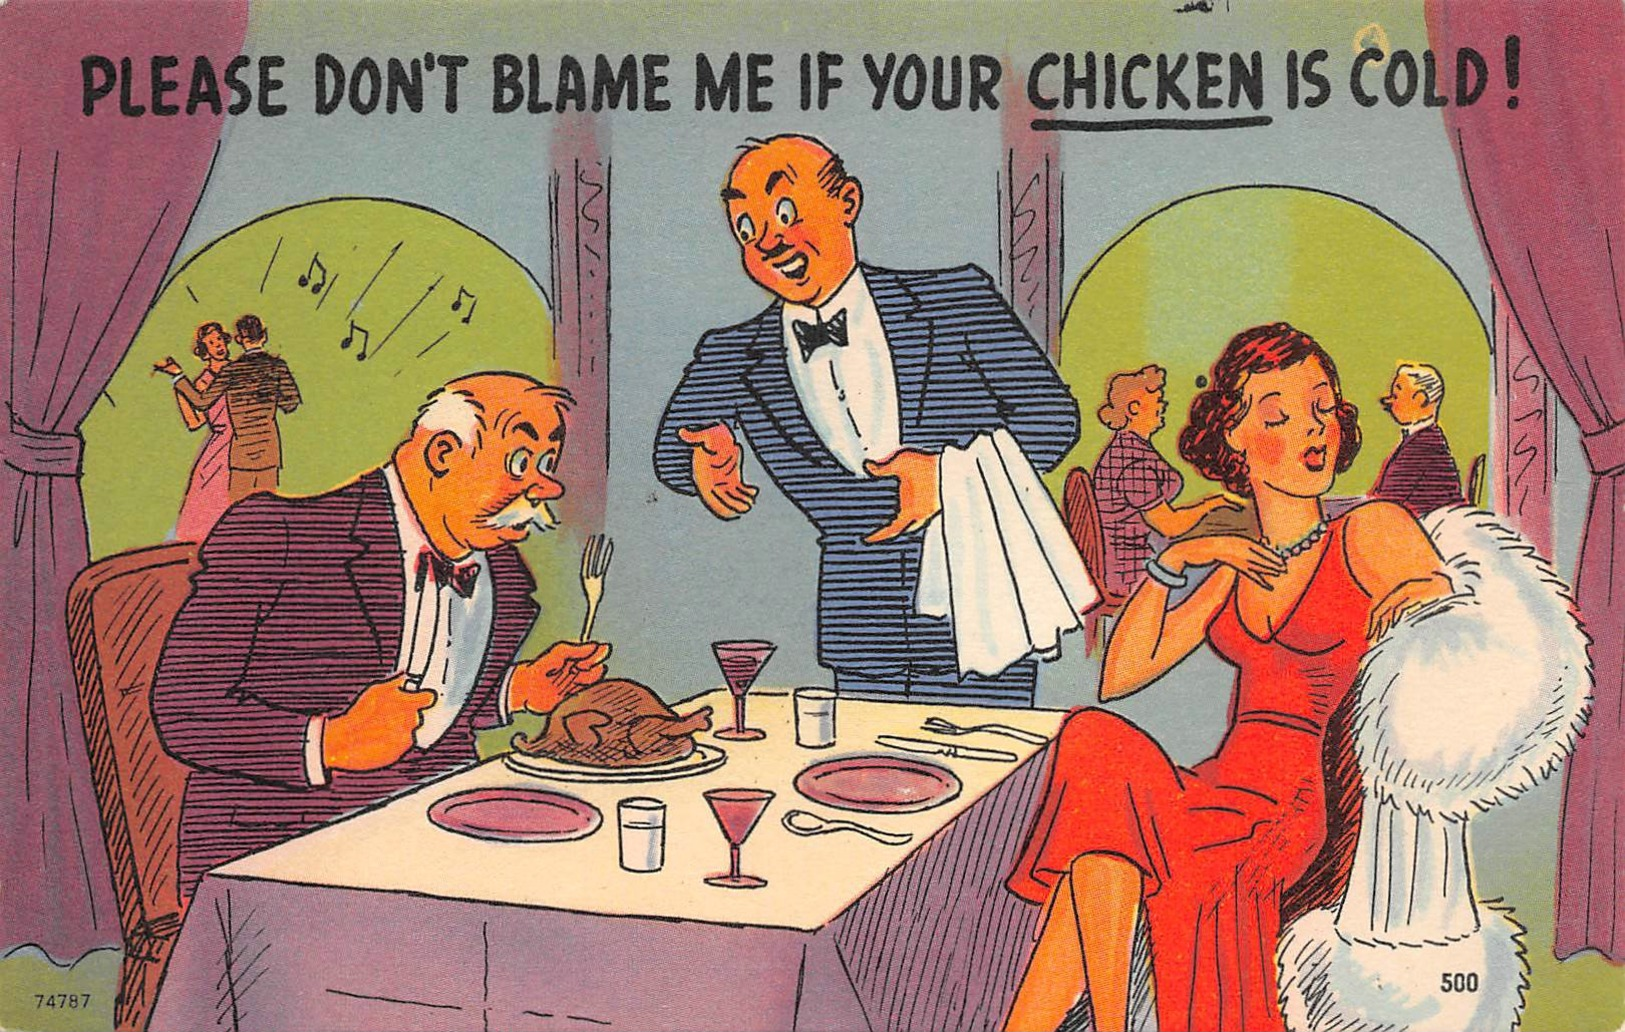 HUMOUR // " PLEASE DON'T BLAME ME IF THE CHICKEN IS COLD " - Humour